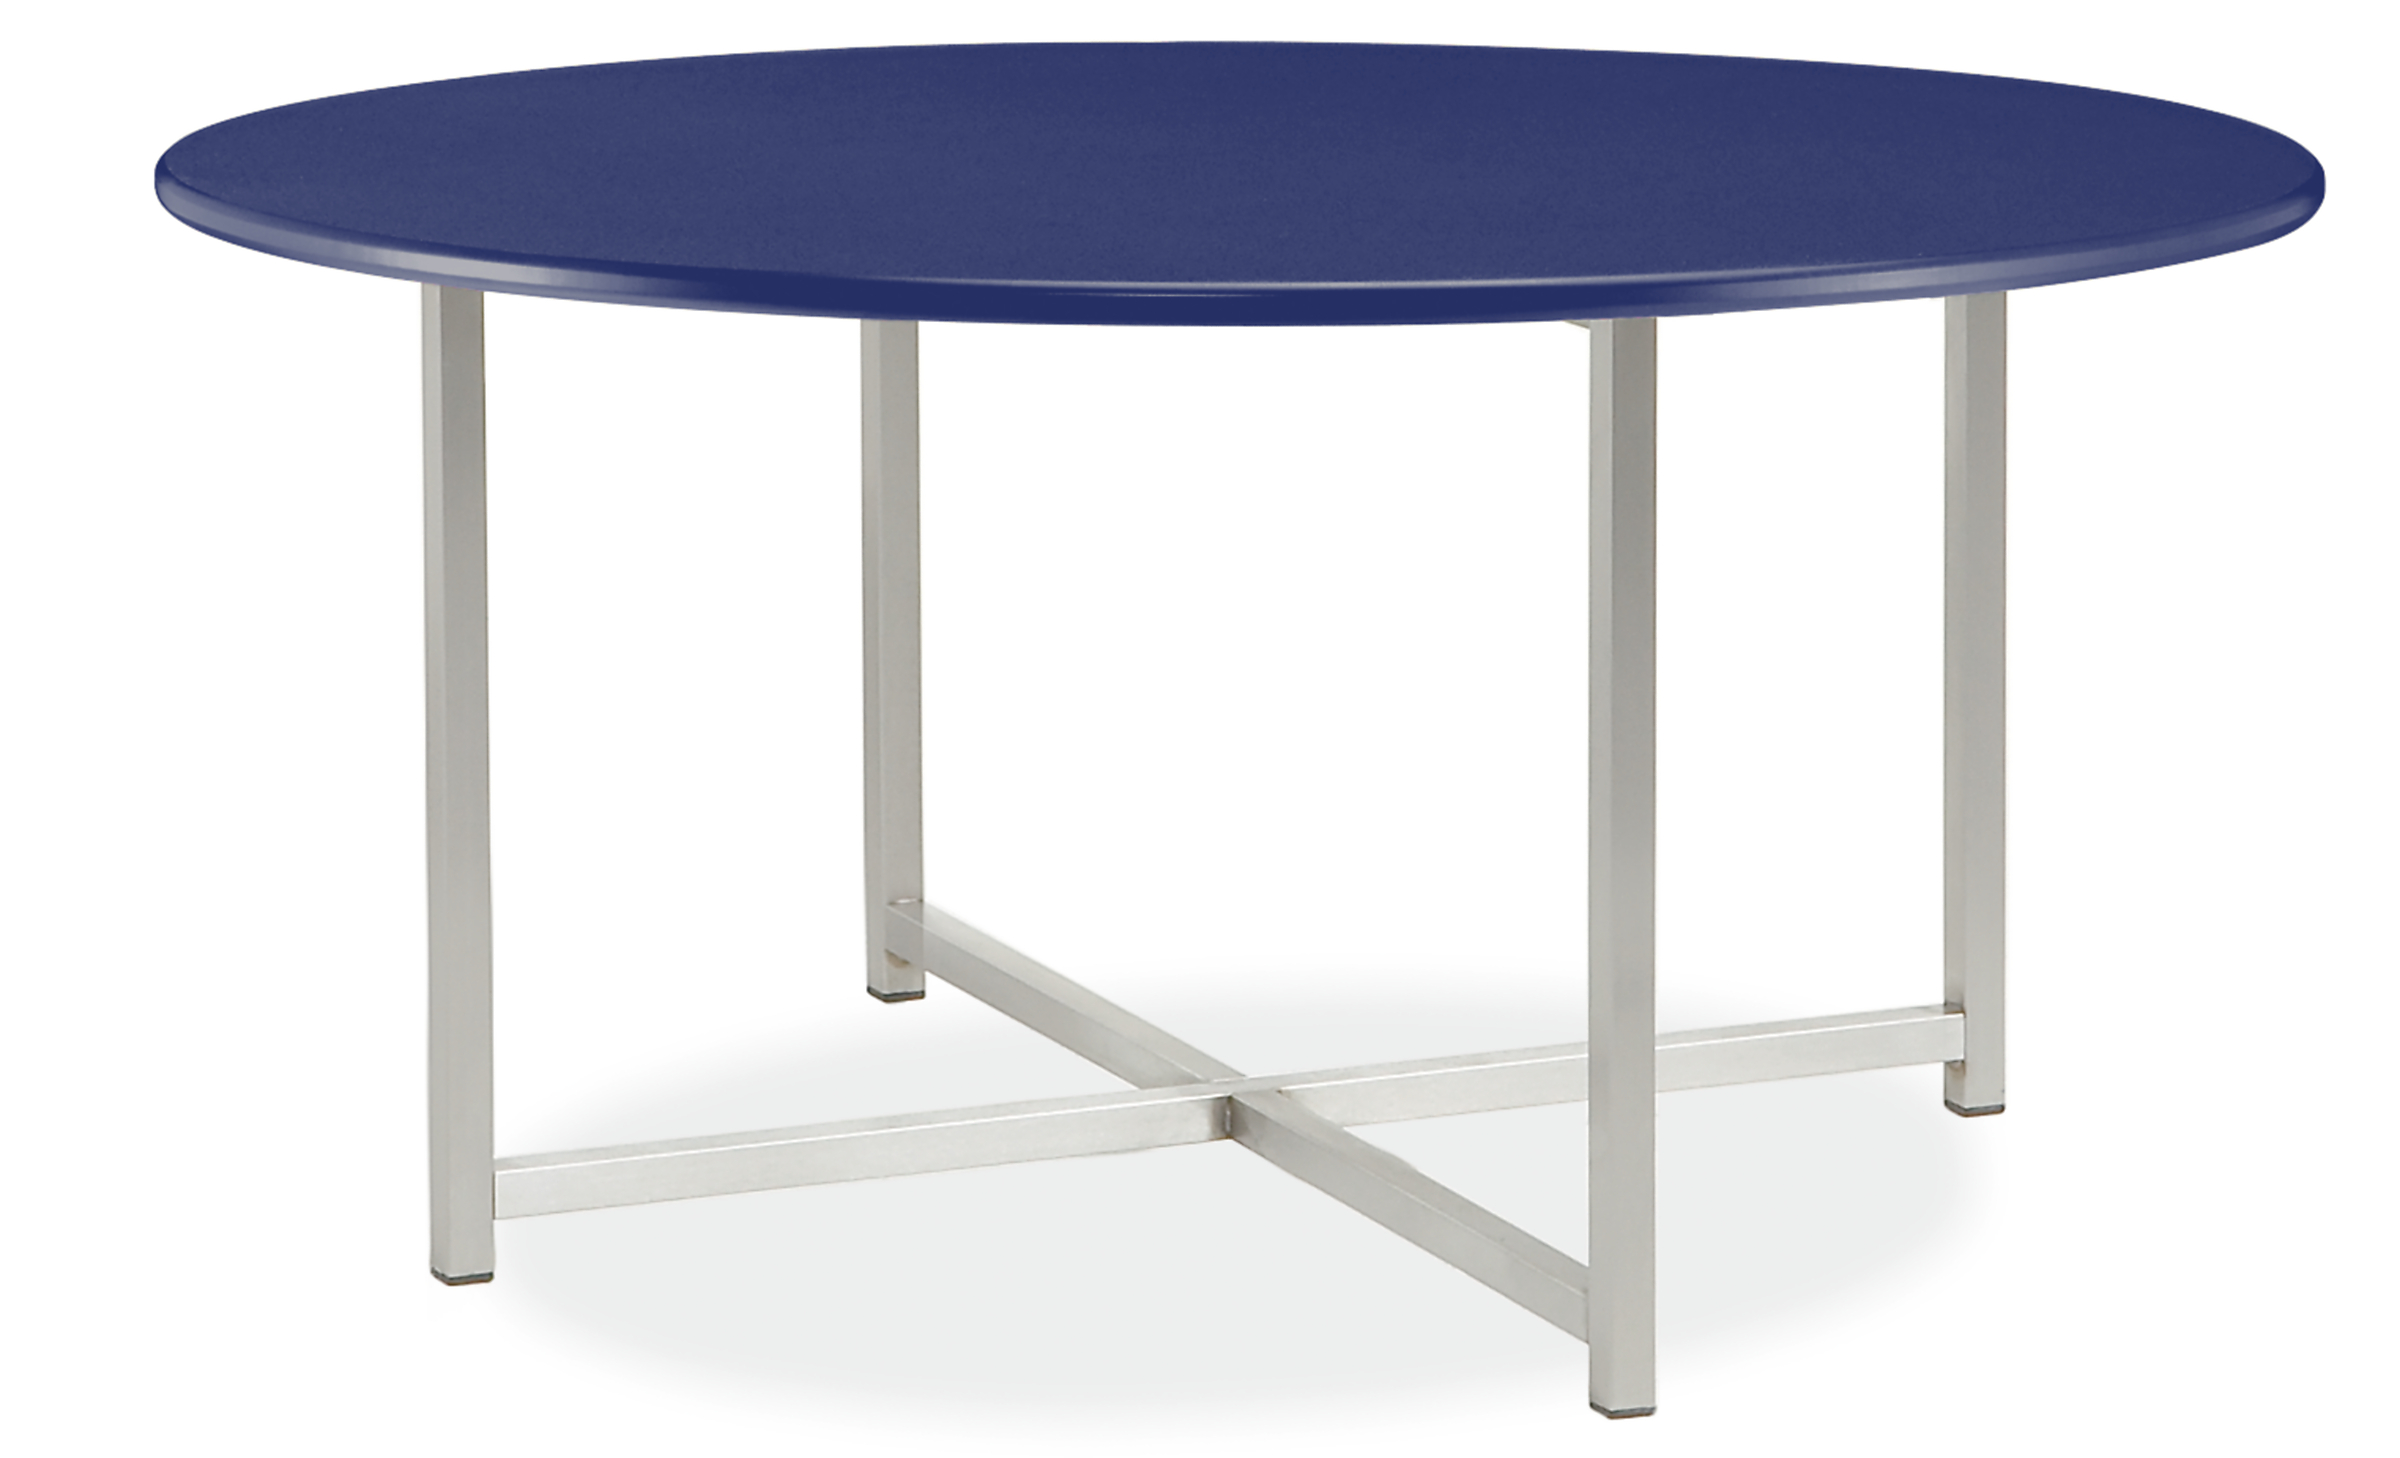 Classic 27 diam 16h Round Outdoor Coffee Table in SS w/Navy HDPE Top